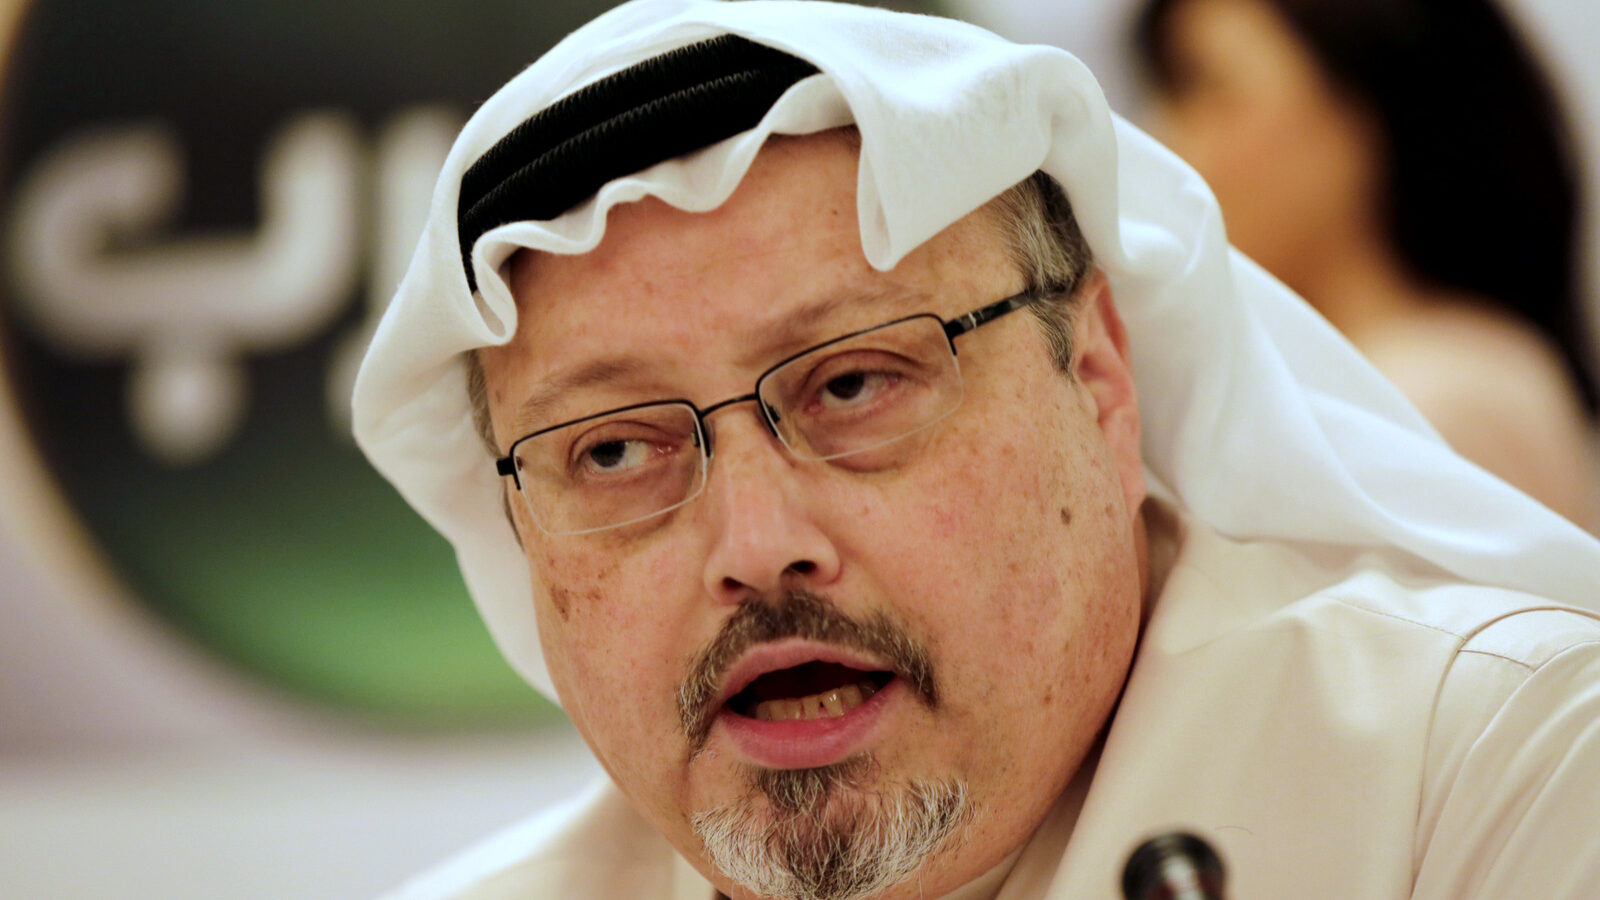 Jamal Khashoggi speaks during a press conference in Manama, Bahrain, Monday, Dec. 15, 2014. Khashoggi was recently banned from reporting by the Saudi government over his public criticism of Donald Trump. (AP Photo/Hasan Jamali)